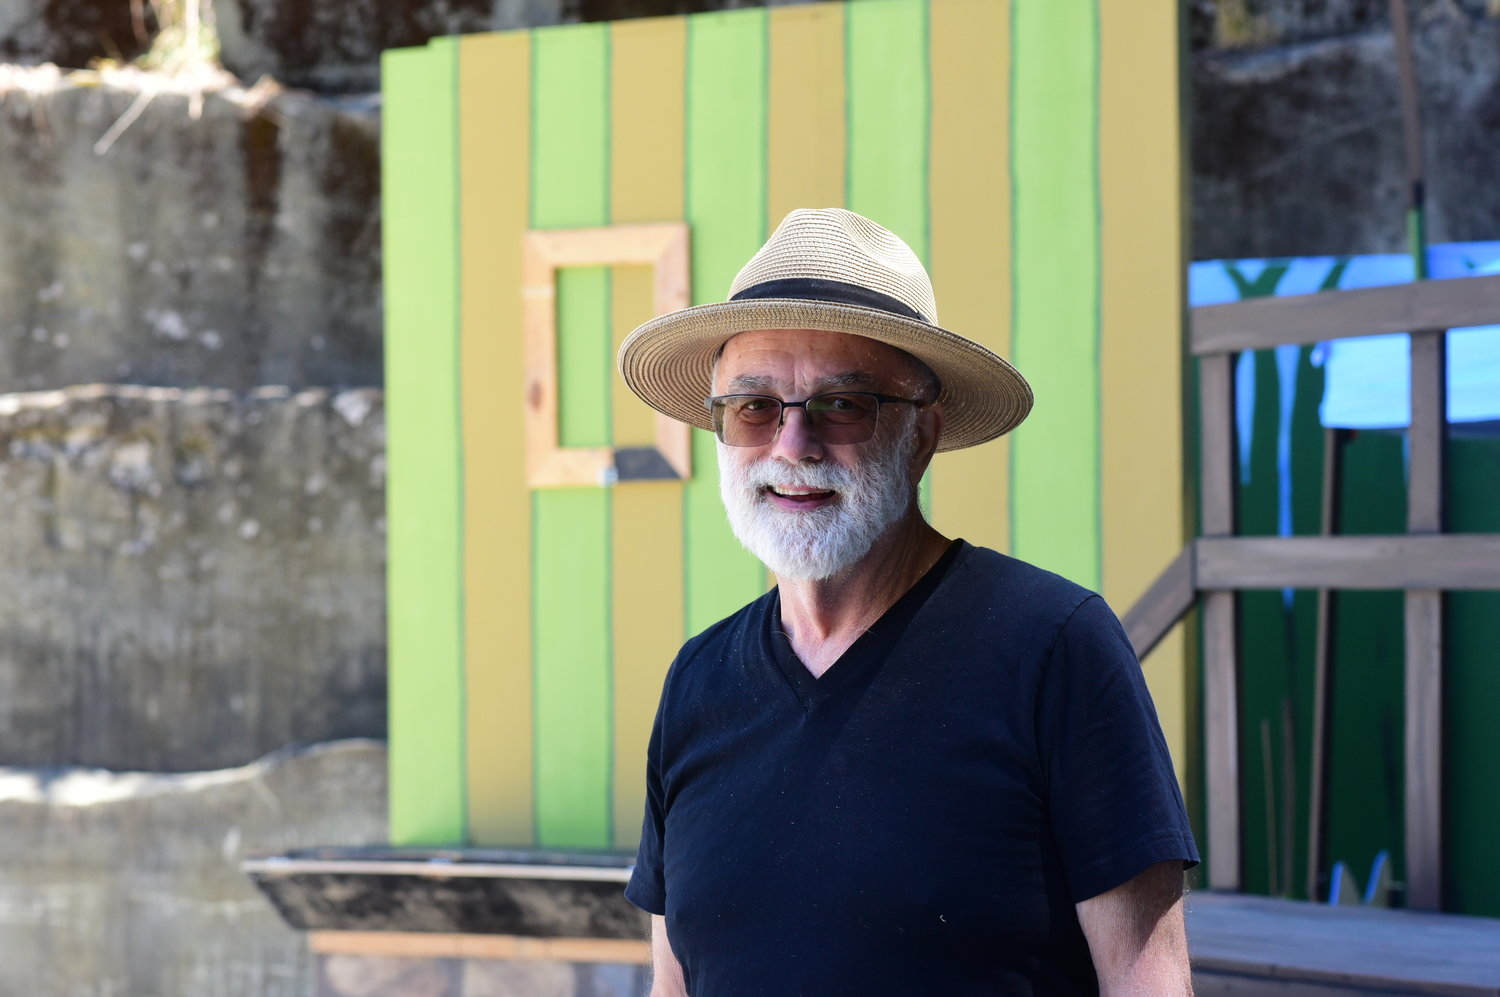 Bob McKenzieSullivan, managing director for the Tenino Young-at-Heart Theatre, stands in front of the set of "A Year With Frog and Toad" in the drained Tenino Quarry Pool.